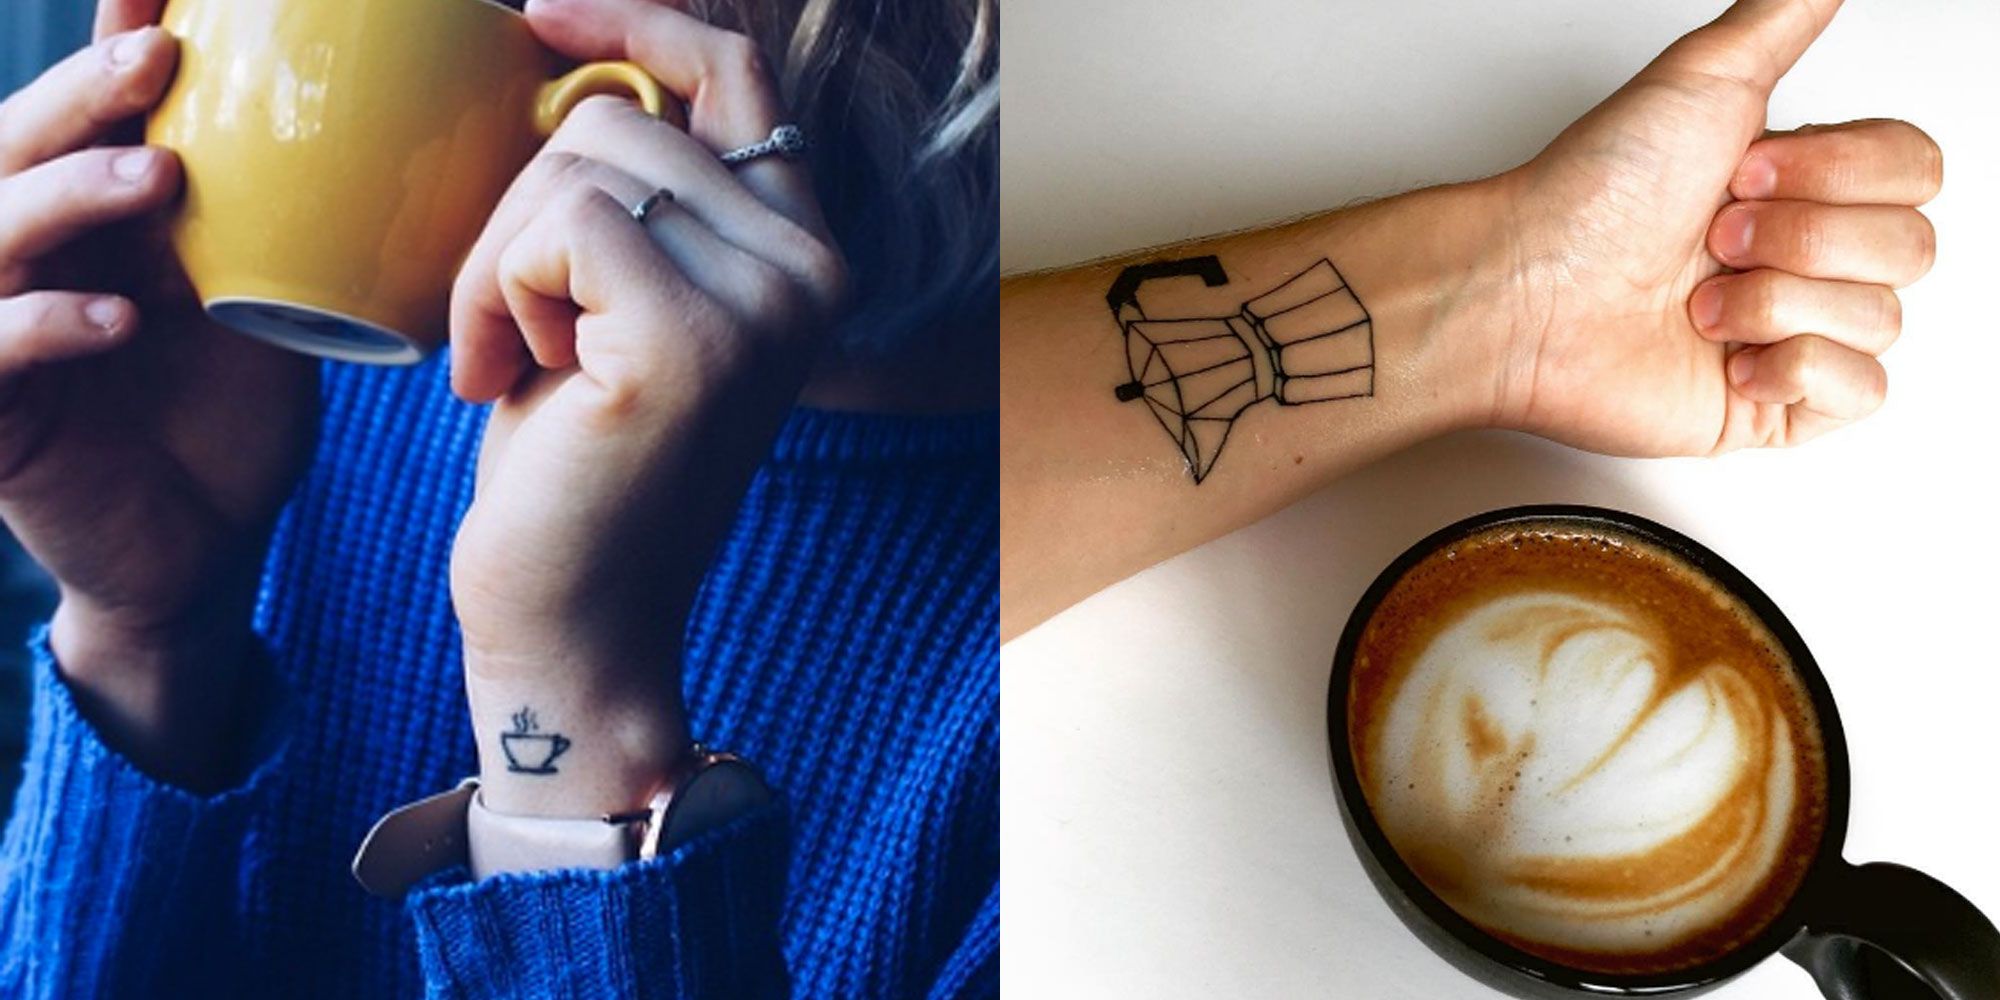 Top 101 Coffee Tattoo Ideas 2021 Inspiration Guide